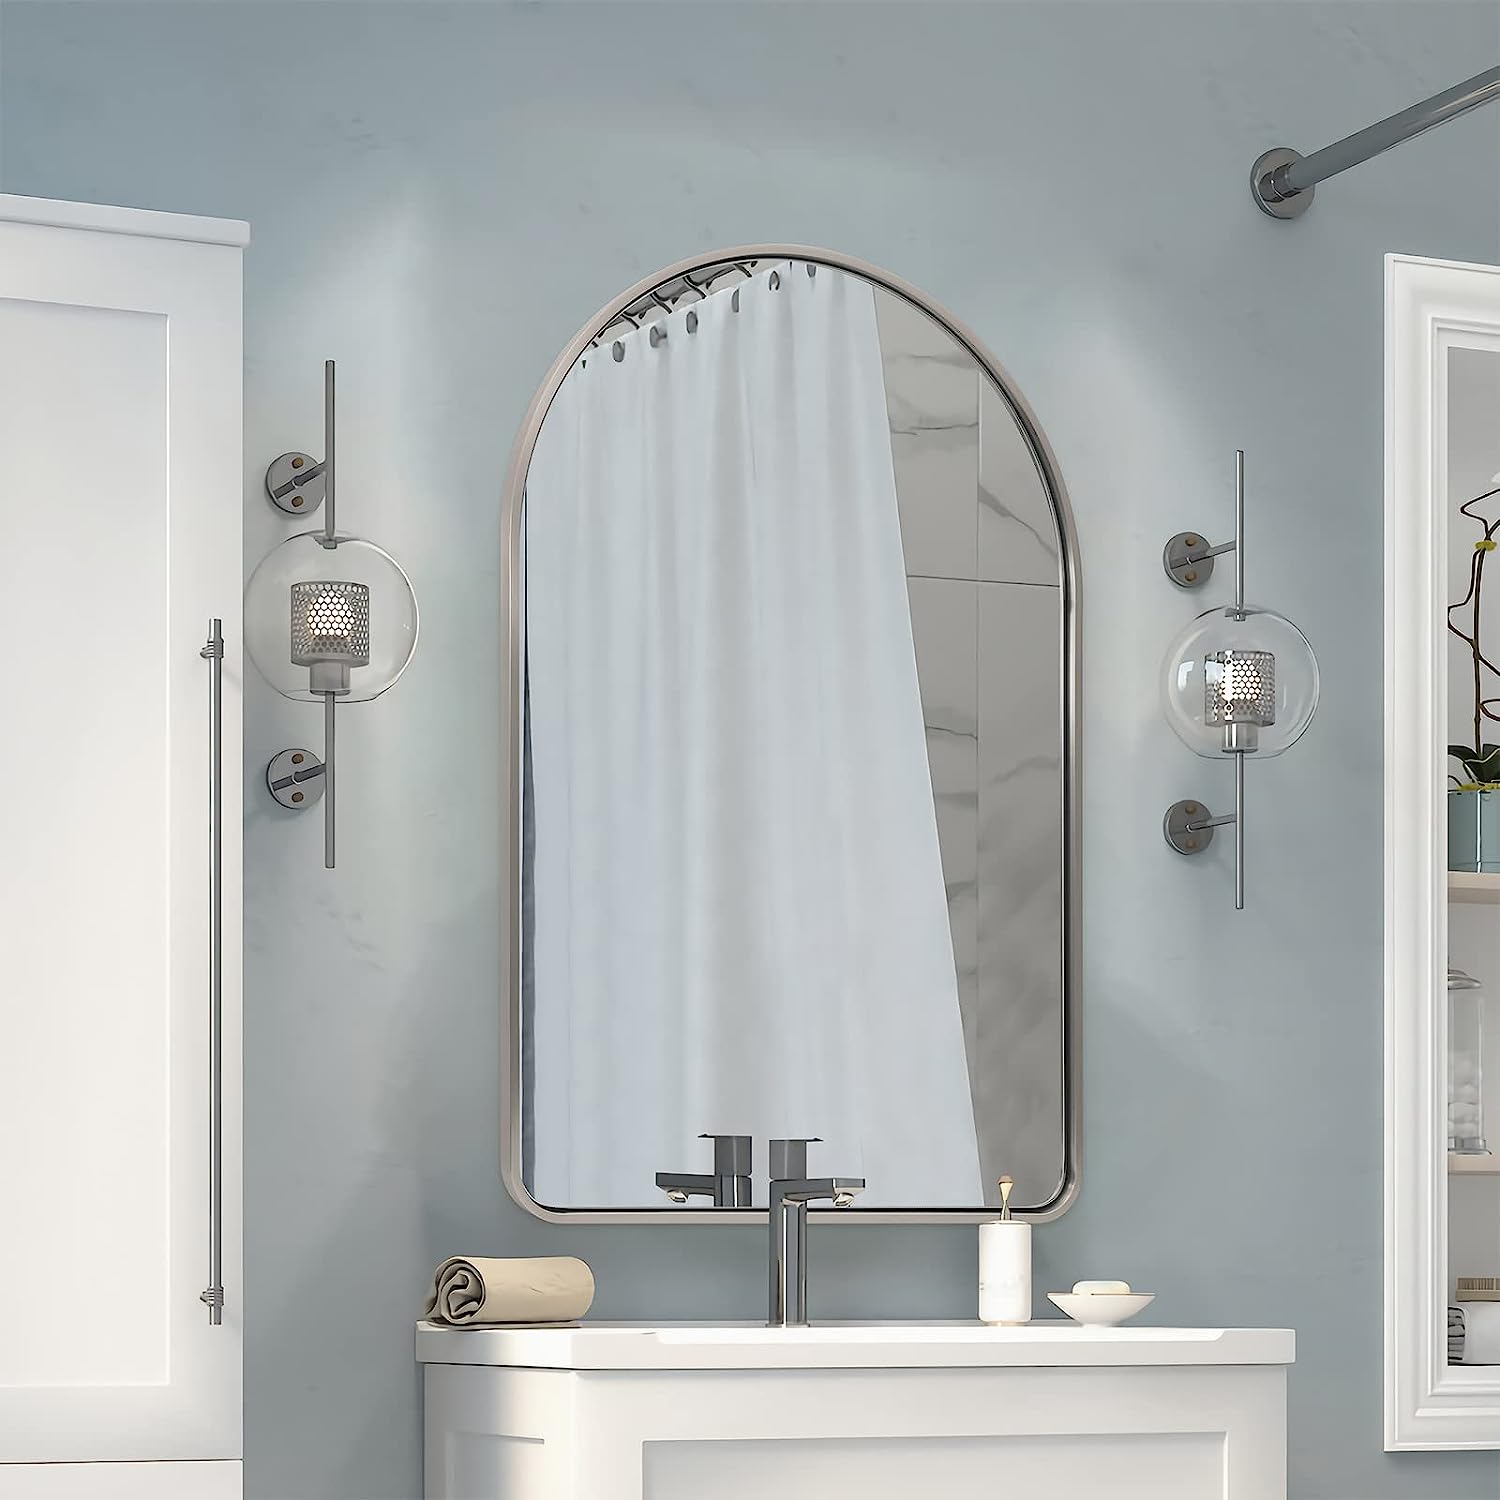 Bold Metal Framed Arched Wall Mirrors for Bathroom/ Living Room/Entry